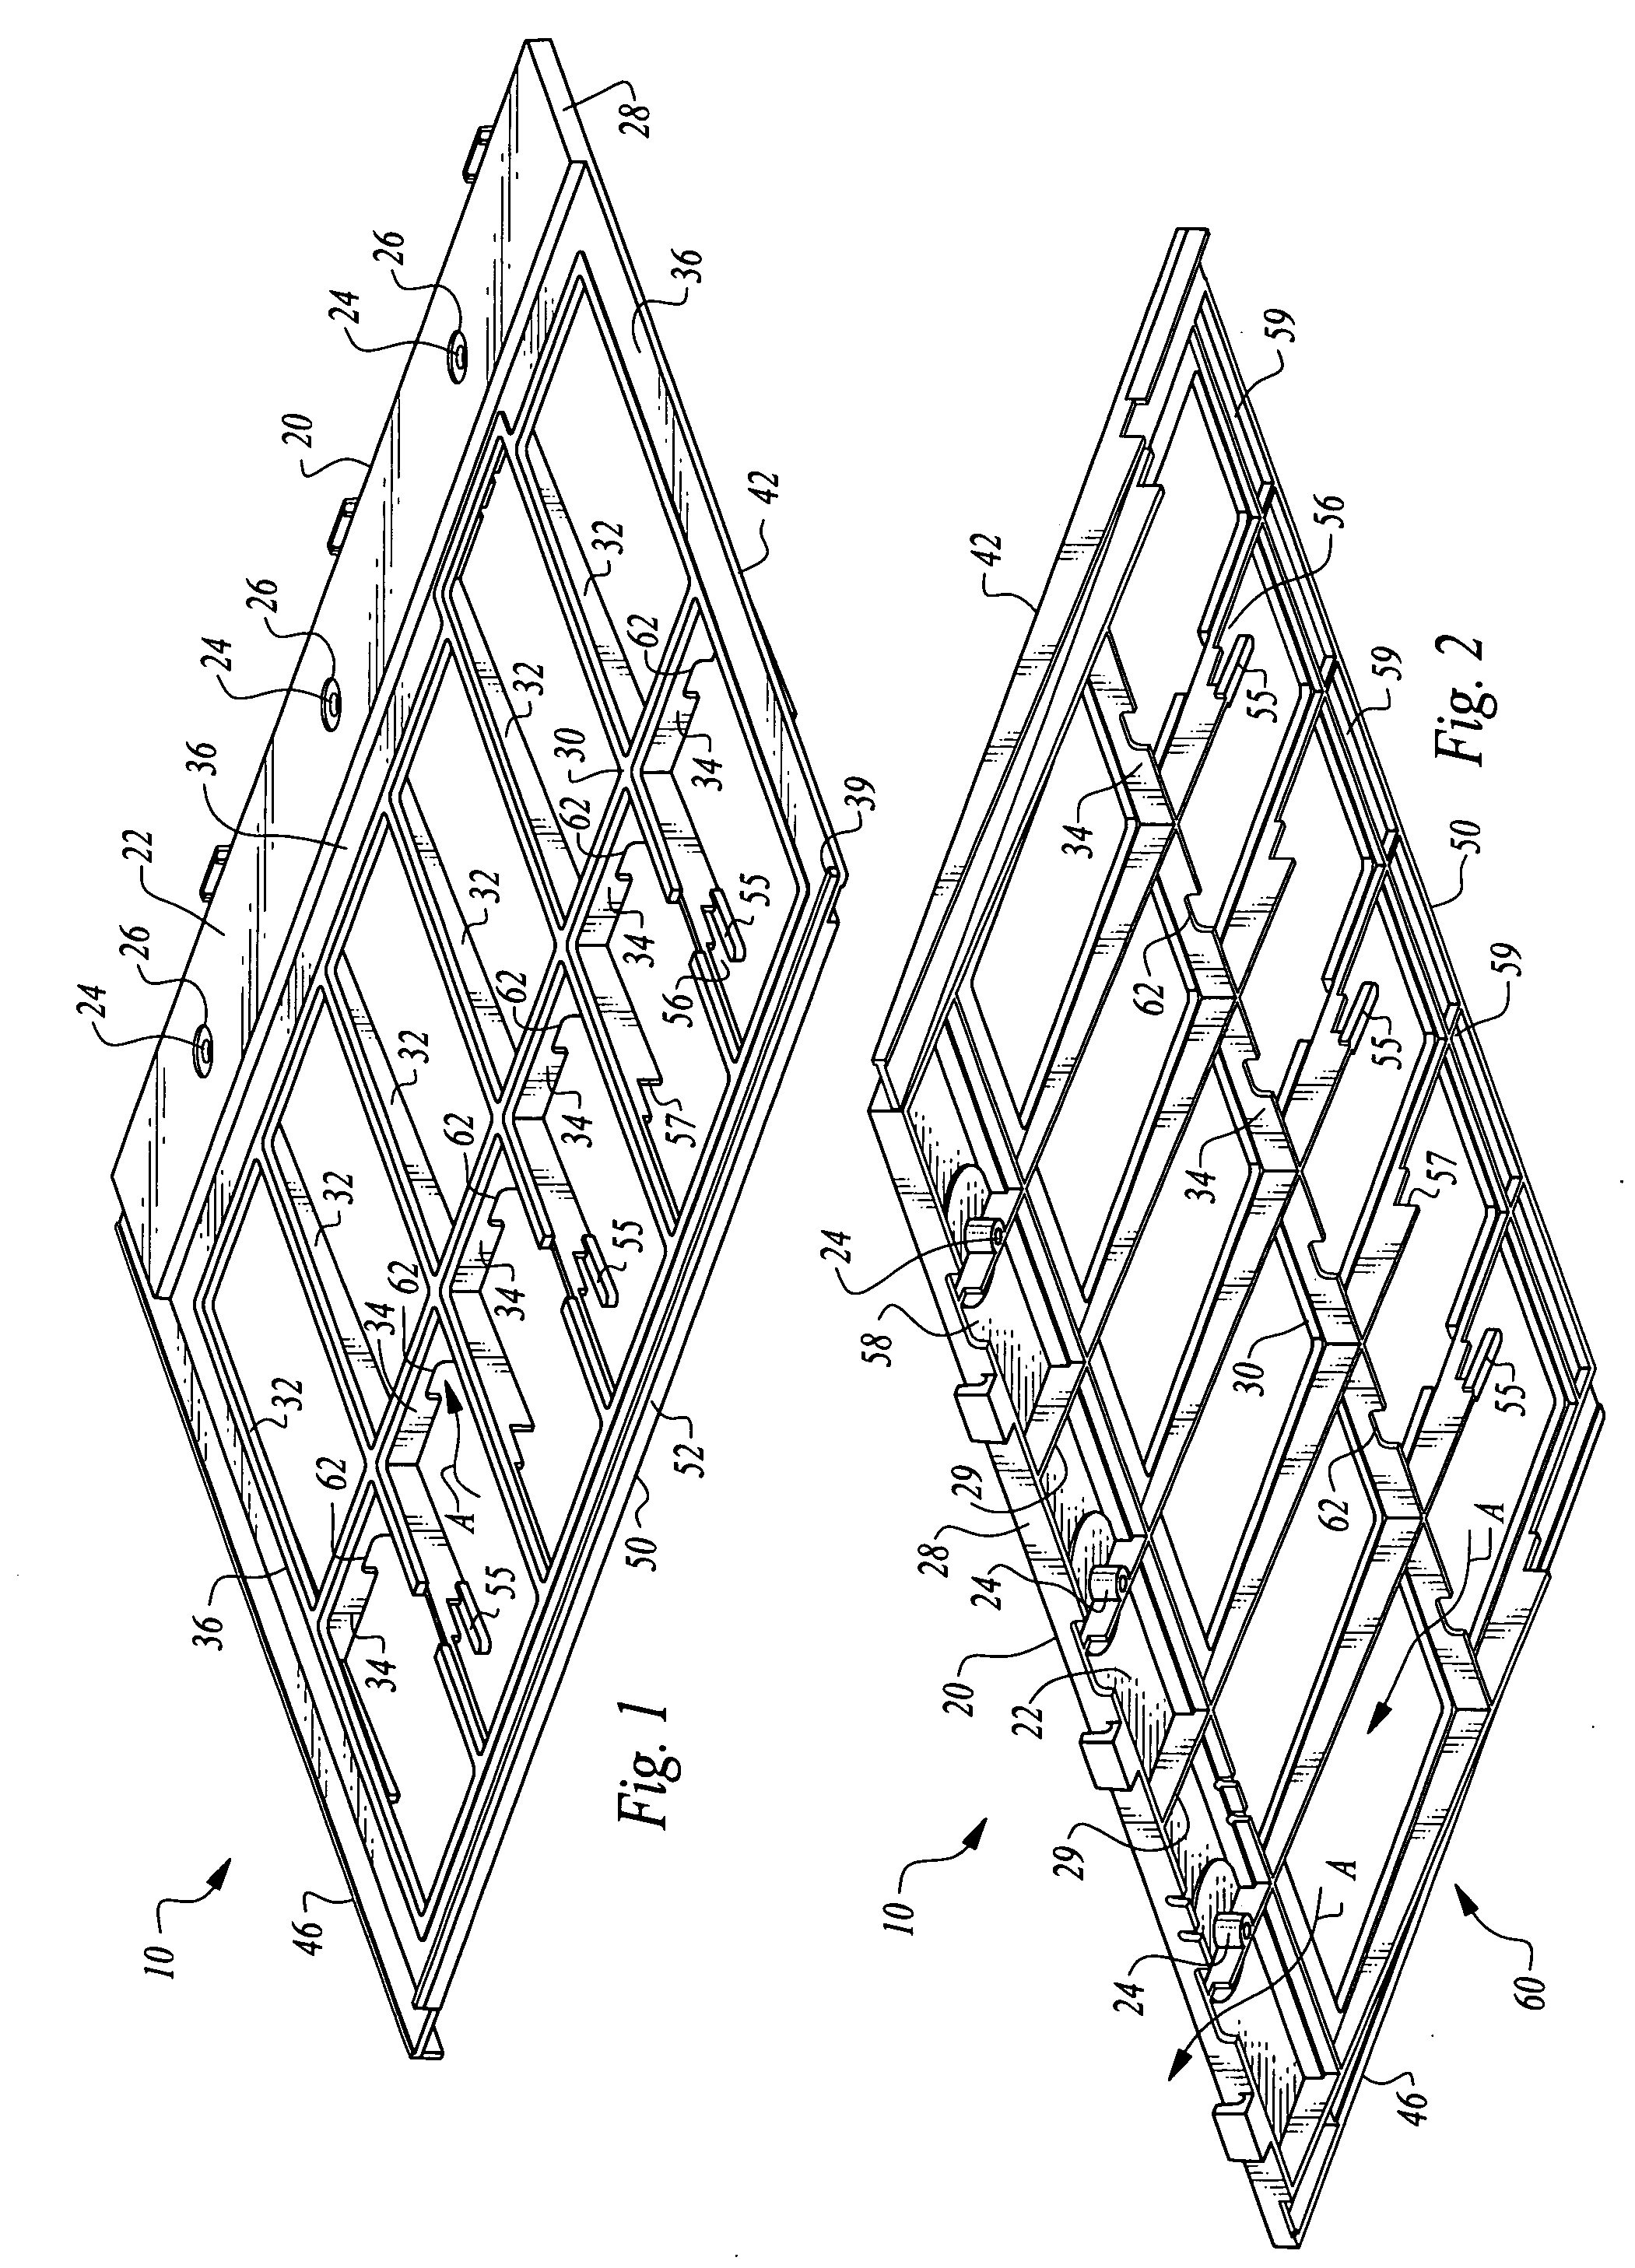 Roof mounting bracket for photovoltaic power generation system